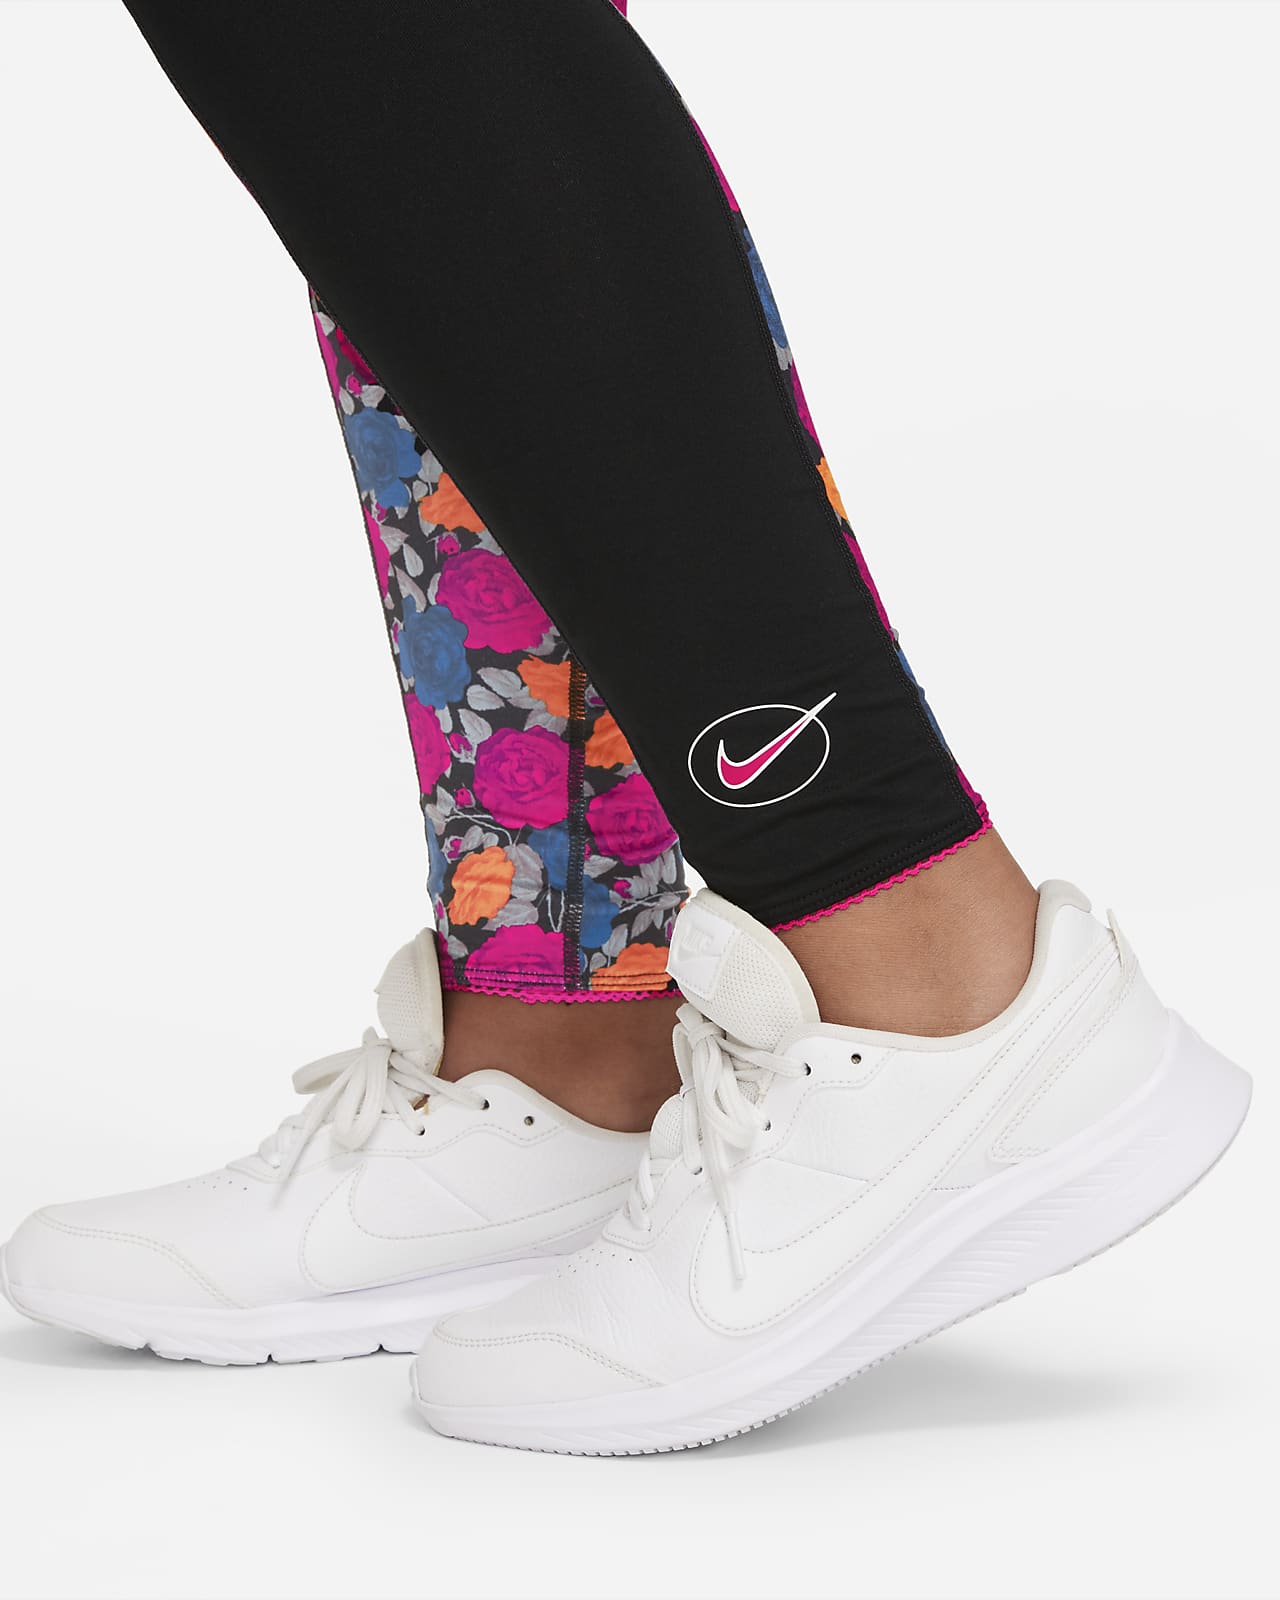 Nike Dri-FIT One Luxe Big Kids' (Girls') High-Rise Leggings (Extended Size)